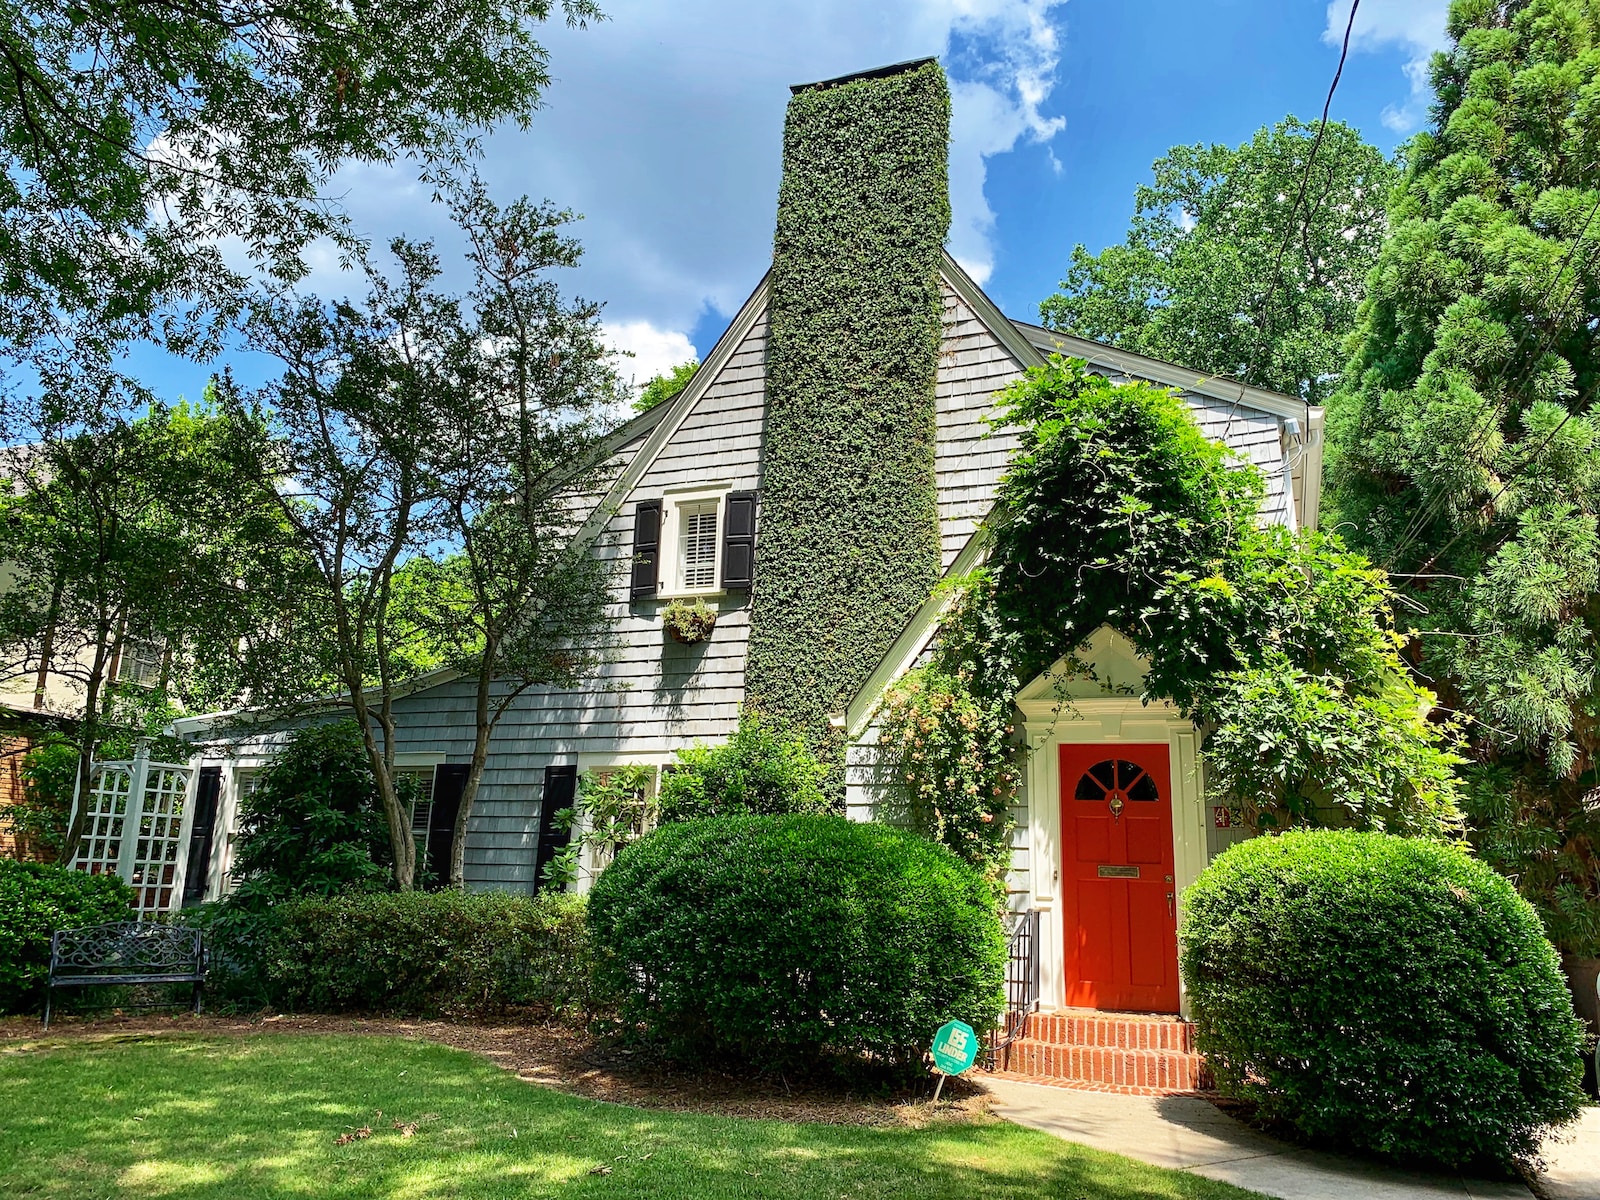 Mountain Brook, Alabama: Mountain Brook's Booming Housing Market: A Guide for Prospective Buyers